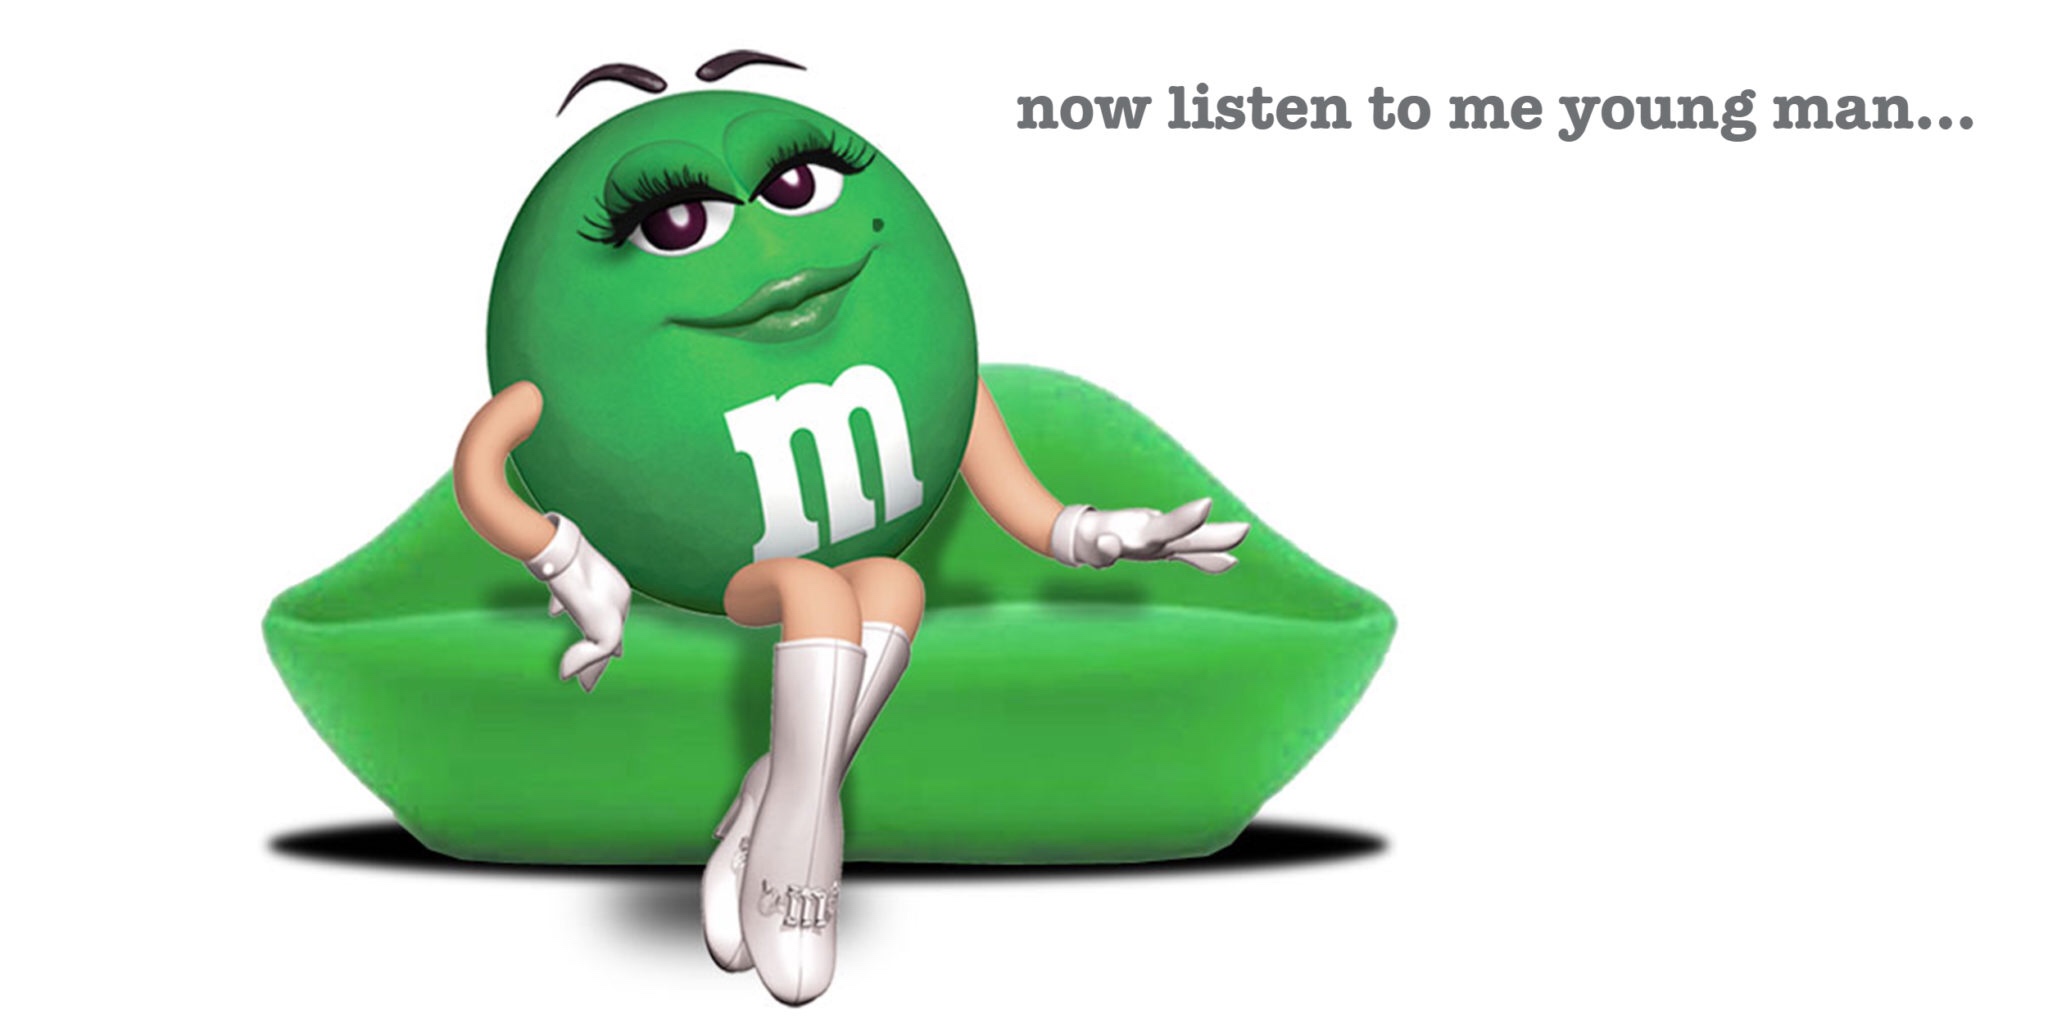 green m&m meme - now listen to me young man...